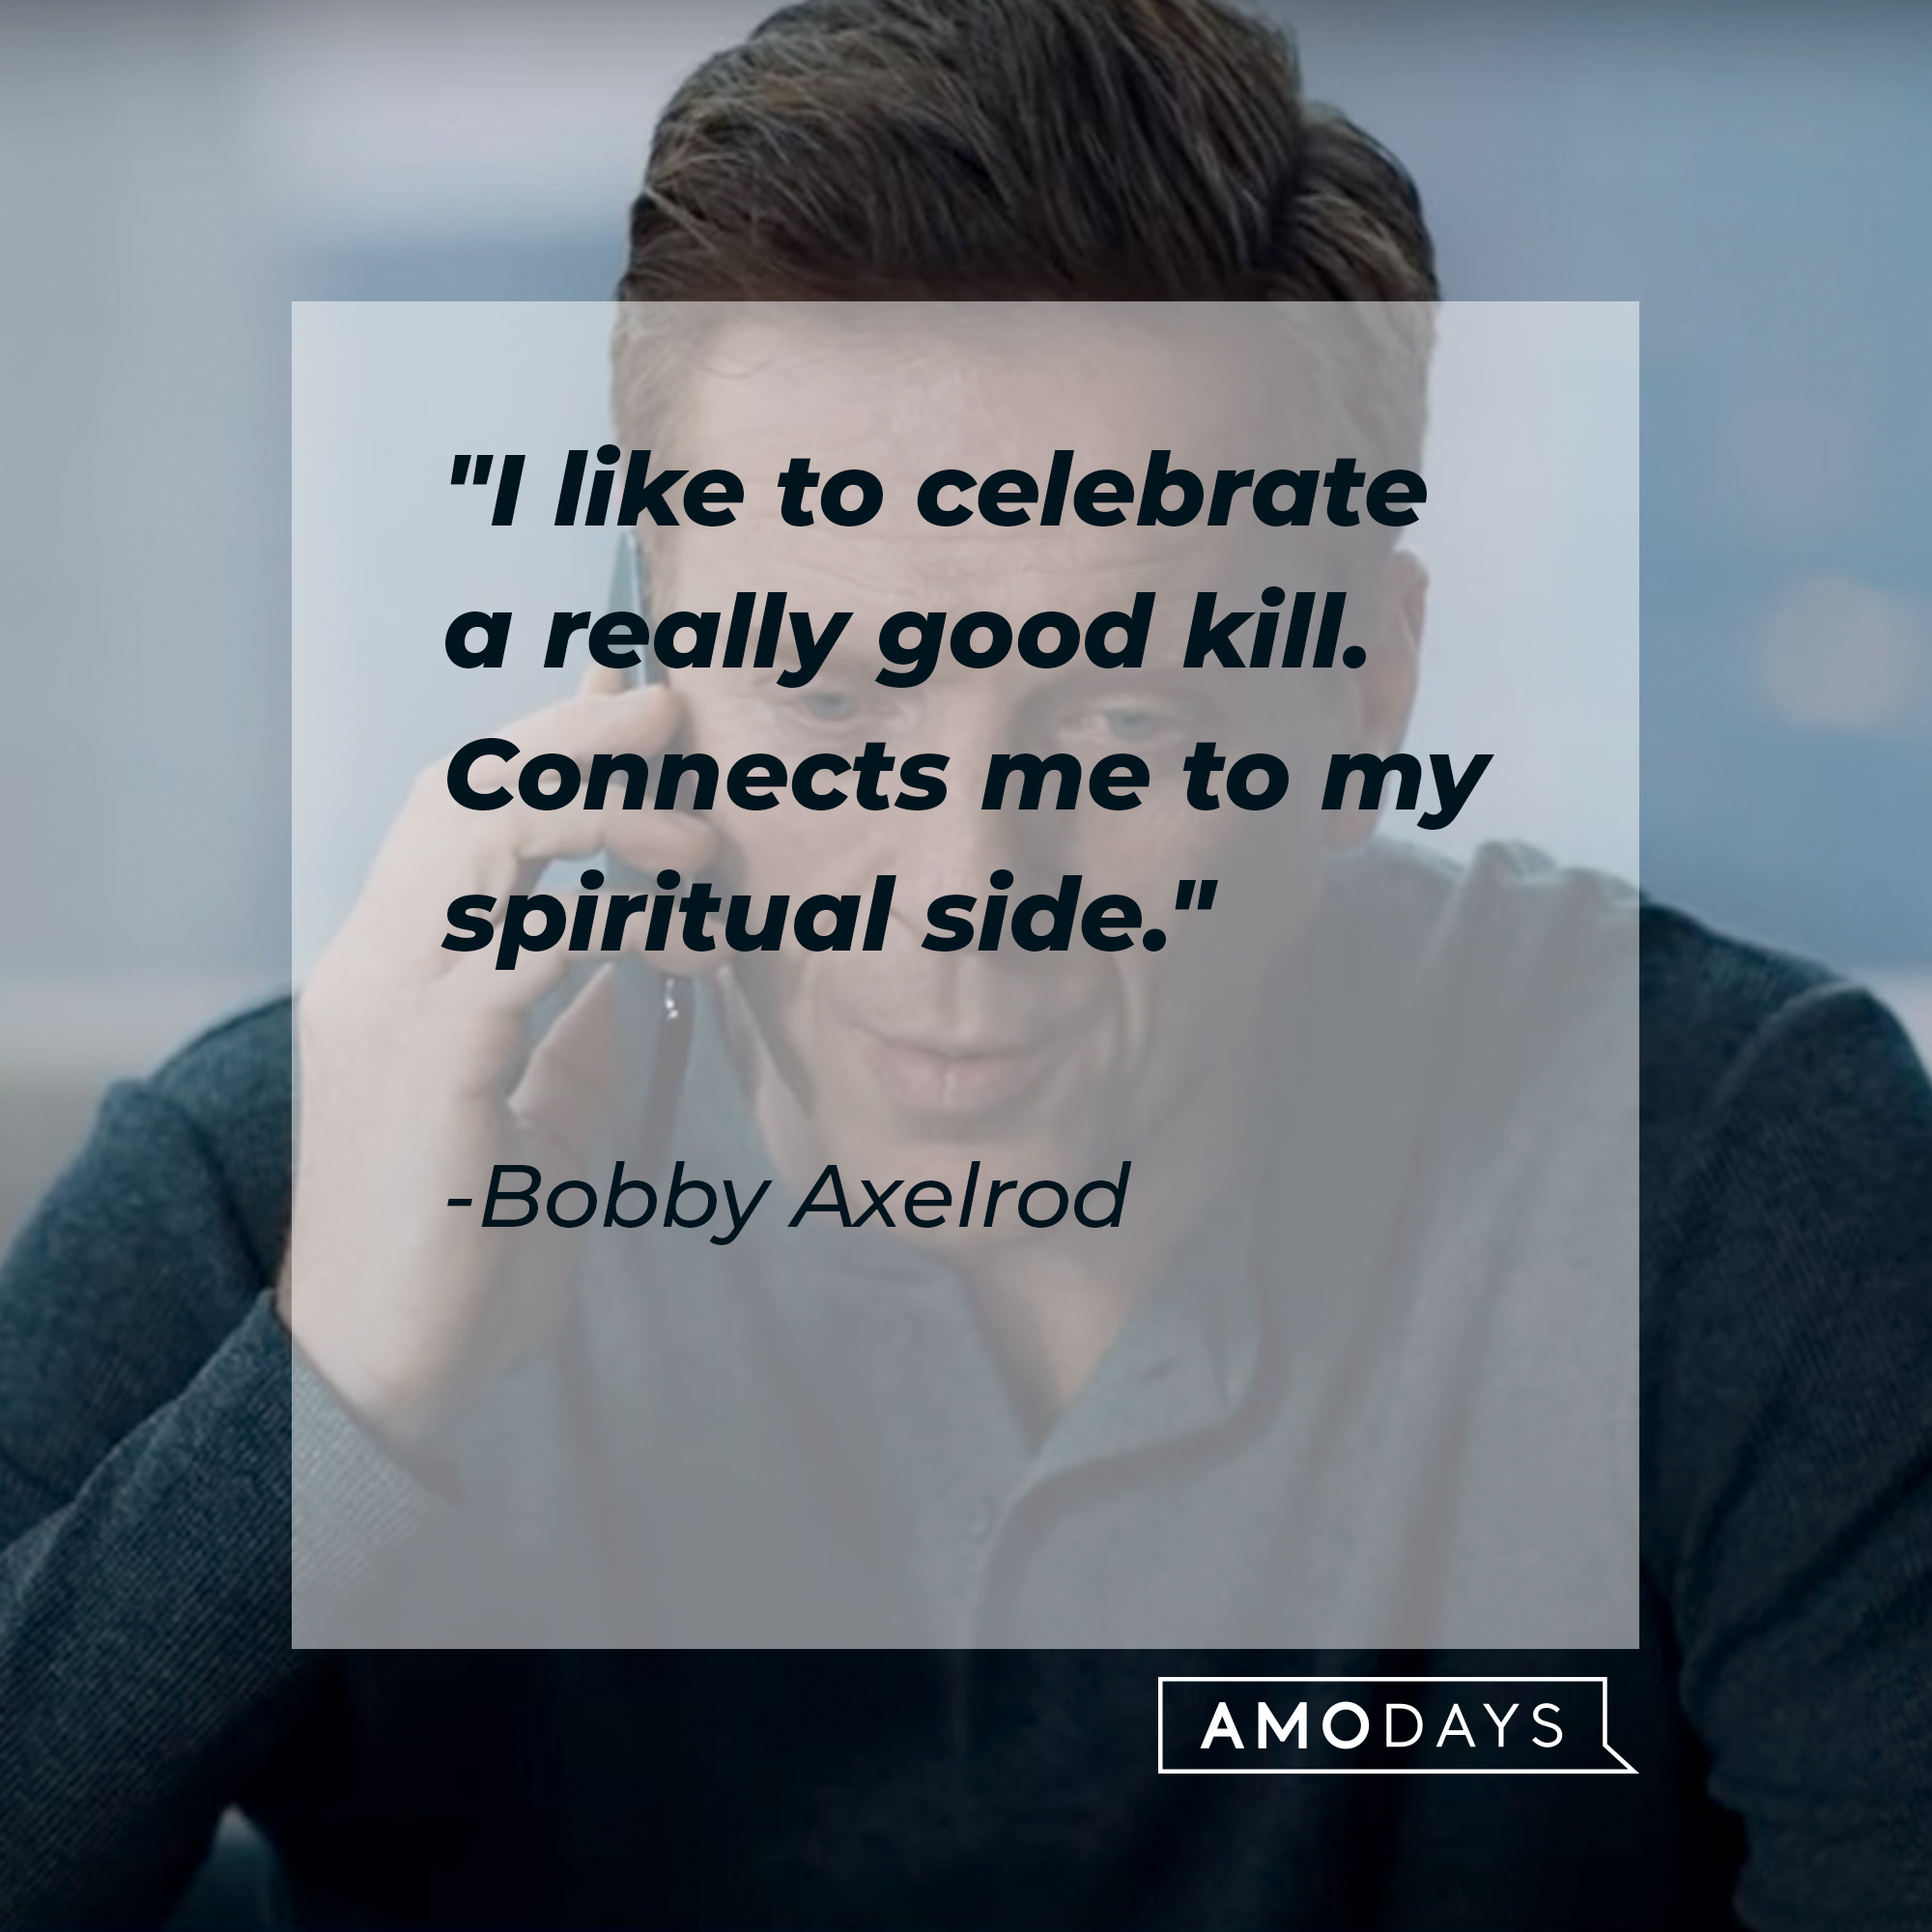 Bobby Axelrod's quote: "I like to celebrate a really good kill. Connects me to my spiritual side." | Source: Youtube.com/BillionsOnShowtime